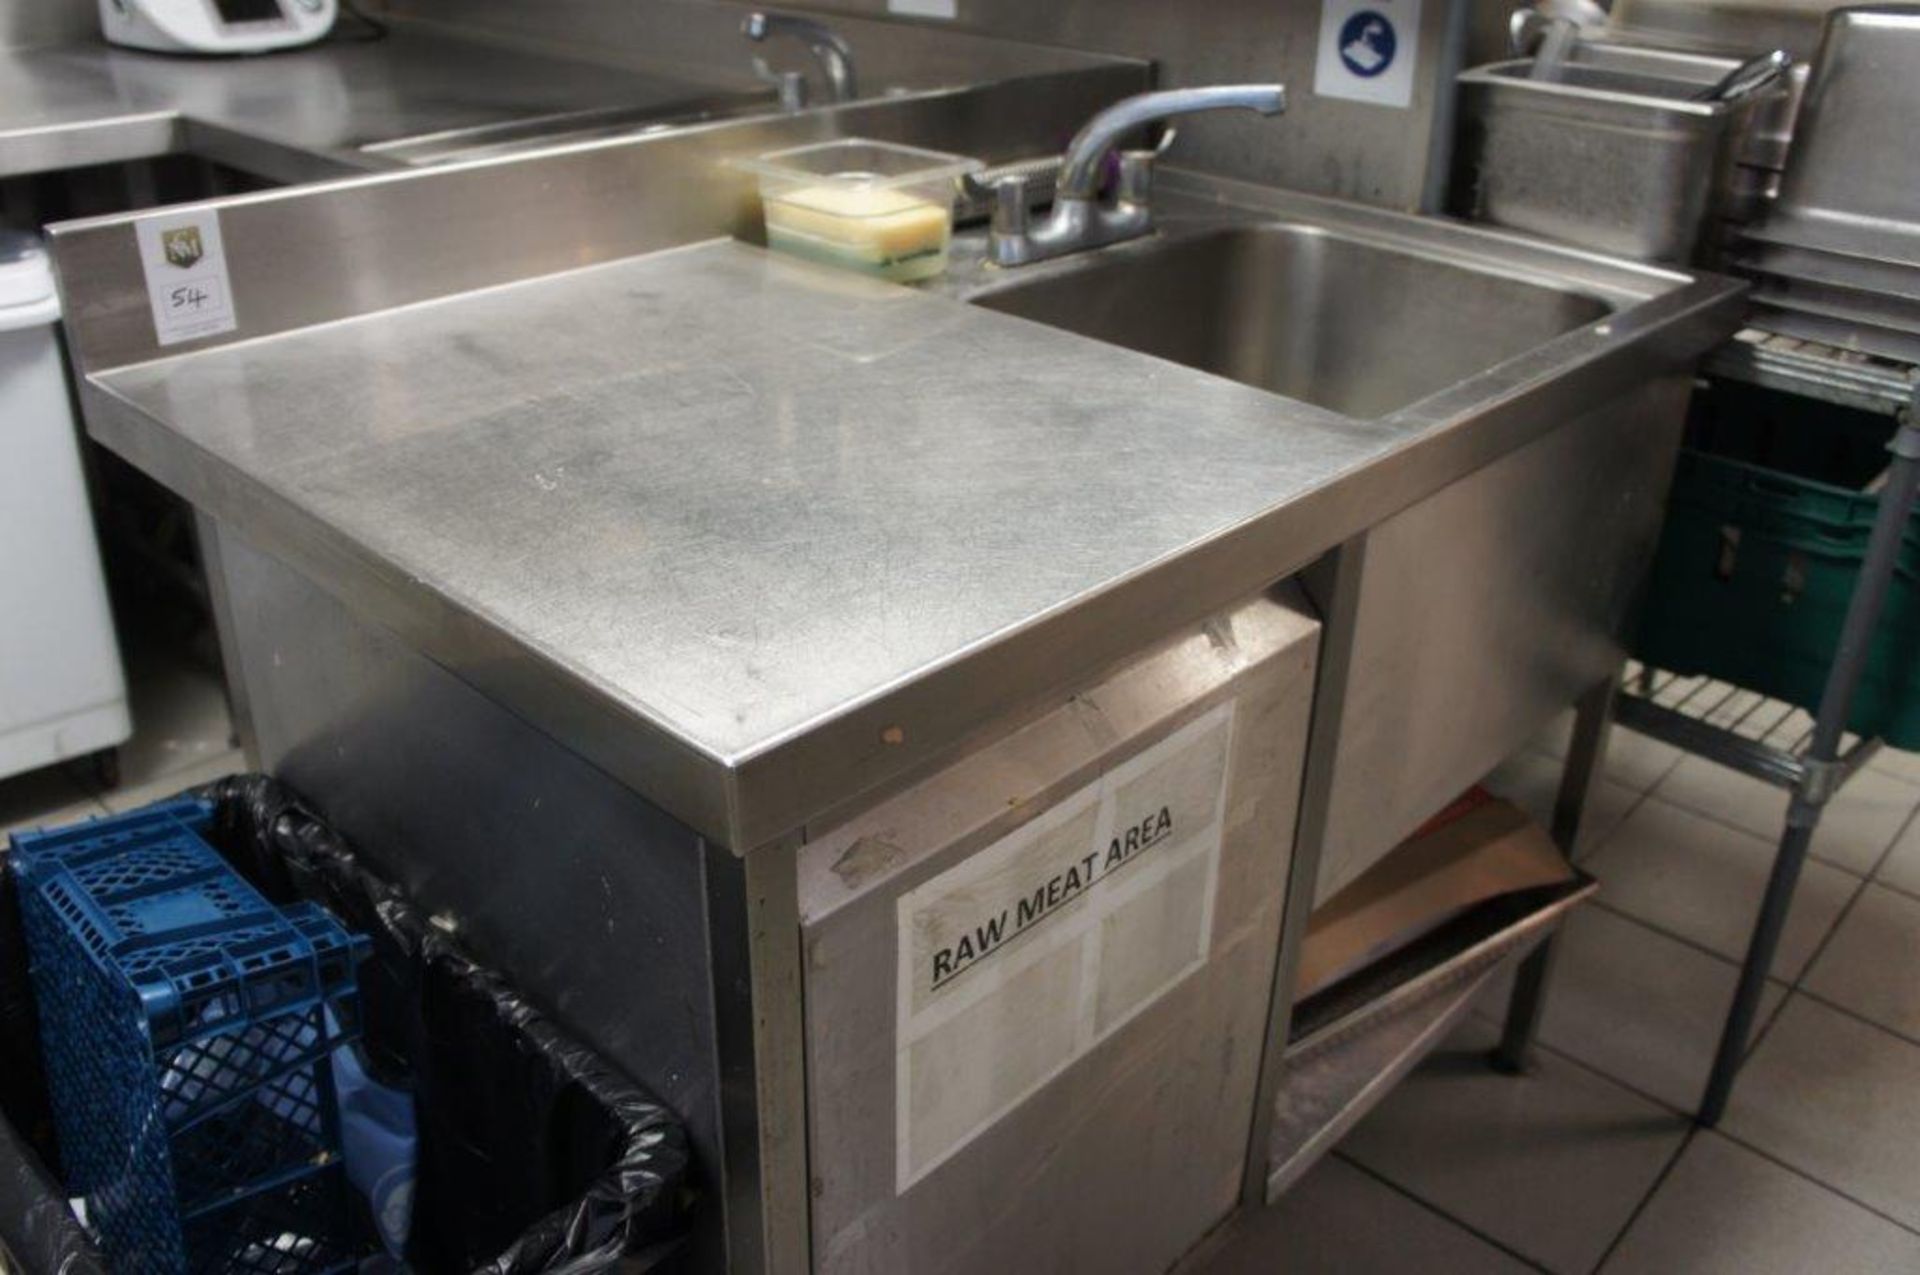 Sink unit with raw meat waste disposal 1150mm - Image 3 of 4